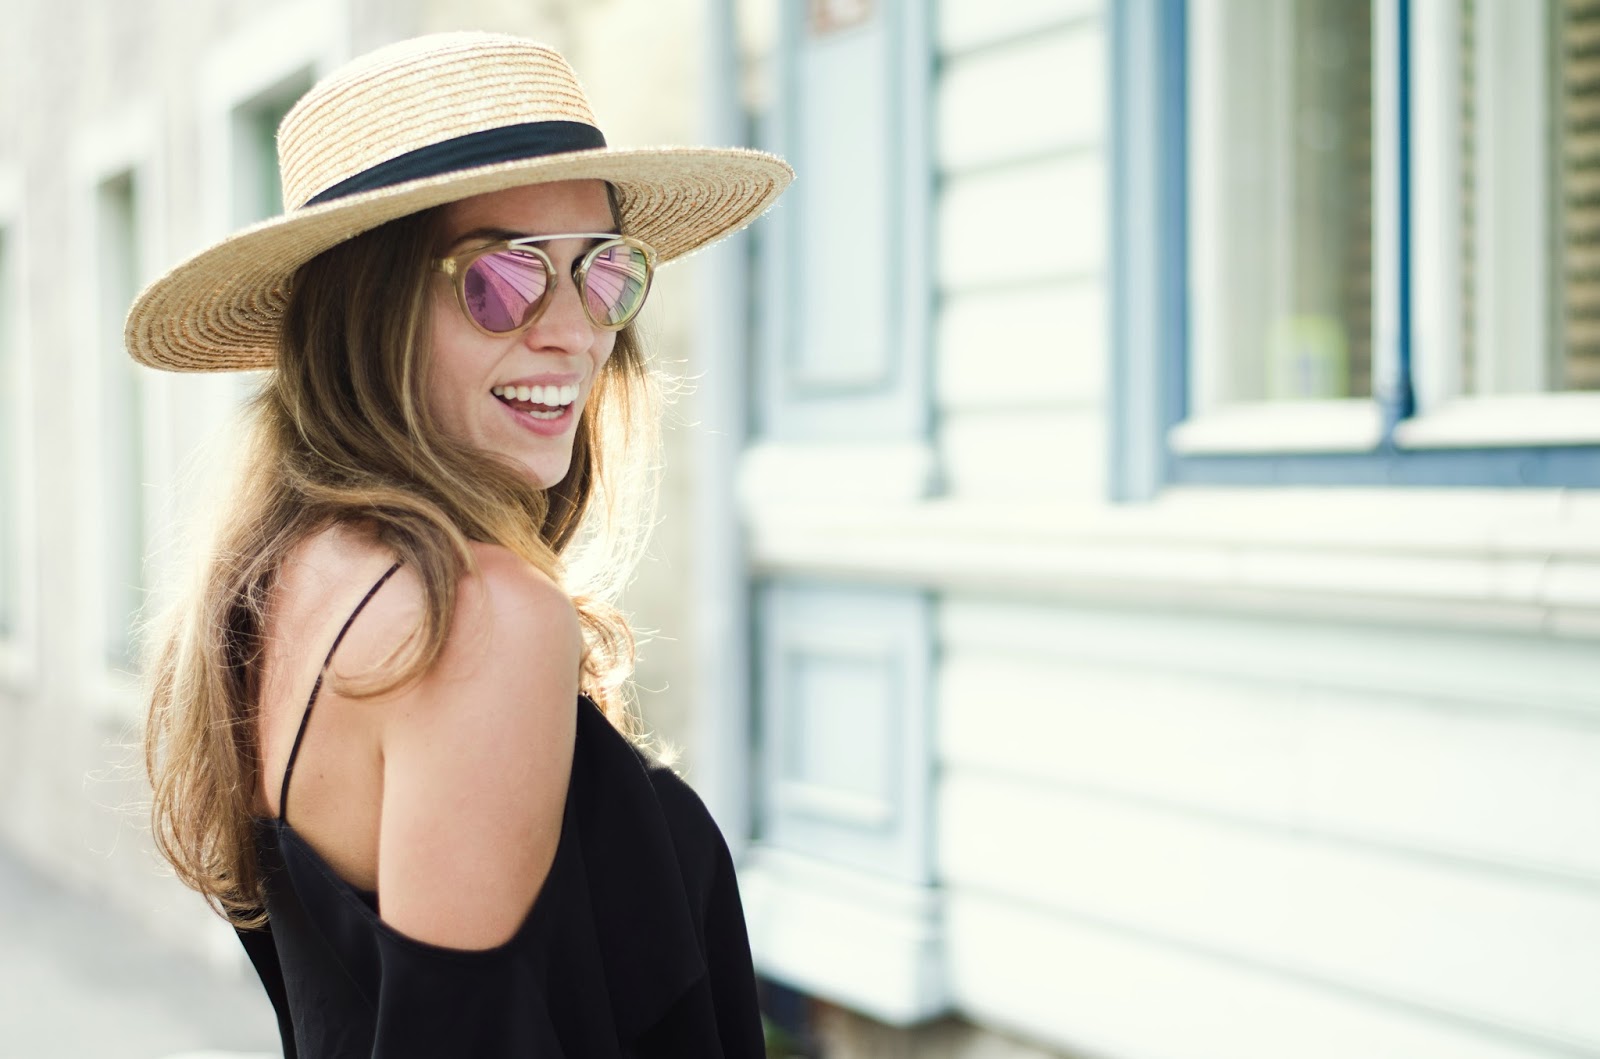 french connection straw hat westward leaning sunglasses